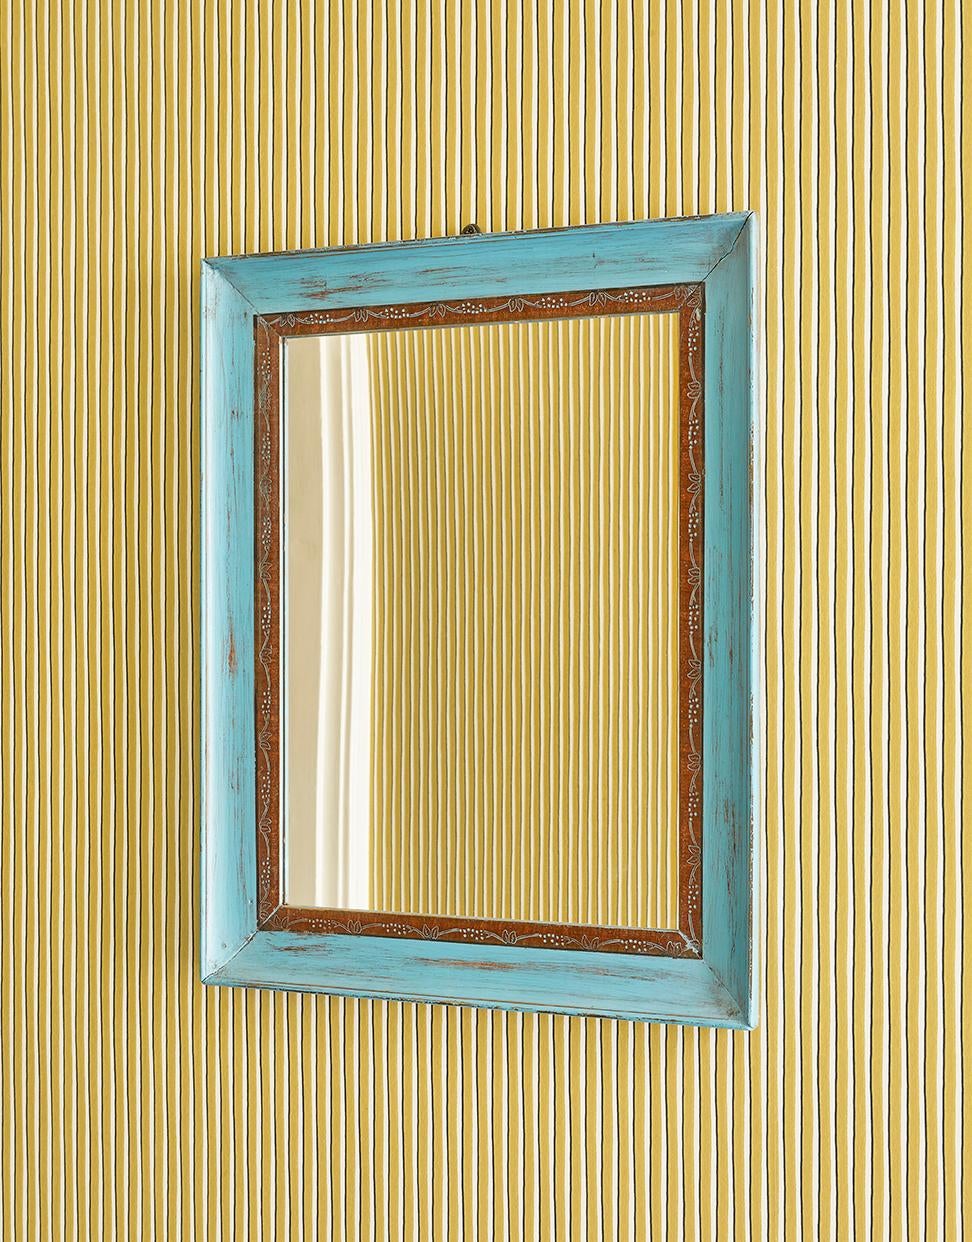 Italy, early 20th century

Mirror in blue painted wooden frame.

Measures: H 64 x W 52 x D 3.5 cm.